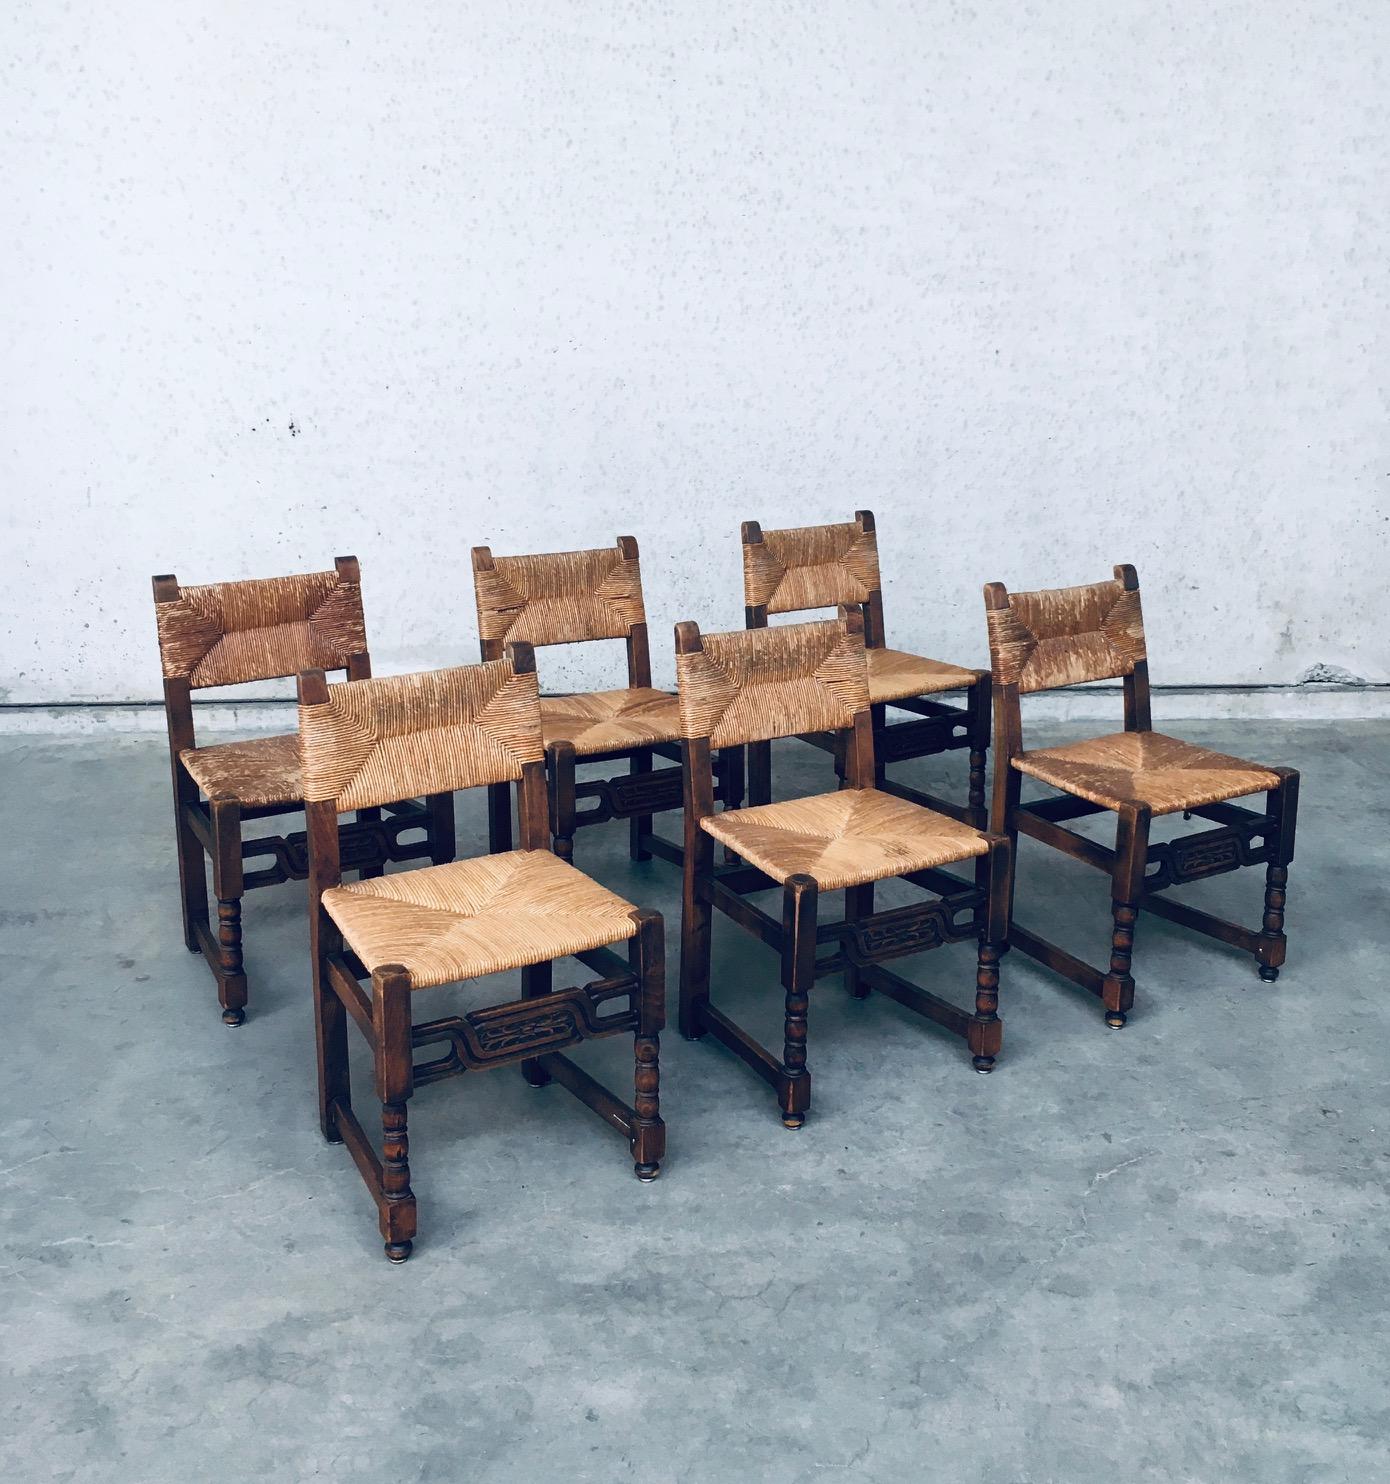 Vintage French Craftmanship Oak & Rush Dining Chairs set of 6 with sculptural legs. Made in France, 1940's. Solid oak constructed and carved frame and legs with rush seat and back. In the style of Tudor or Cromwelian design chairs. These chairs are